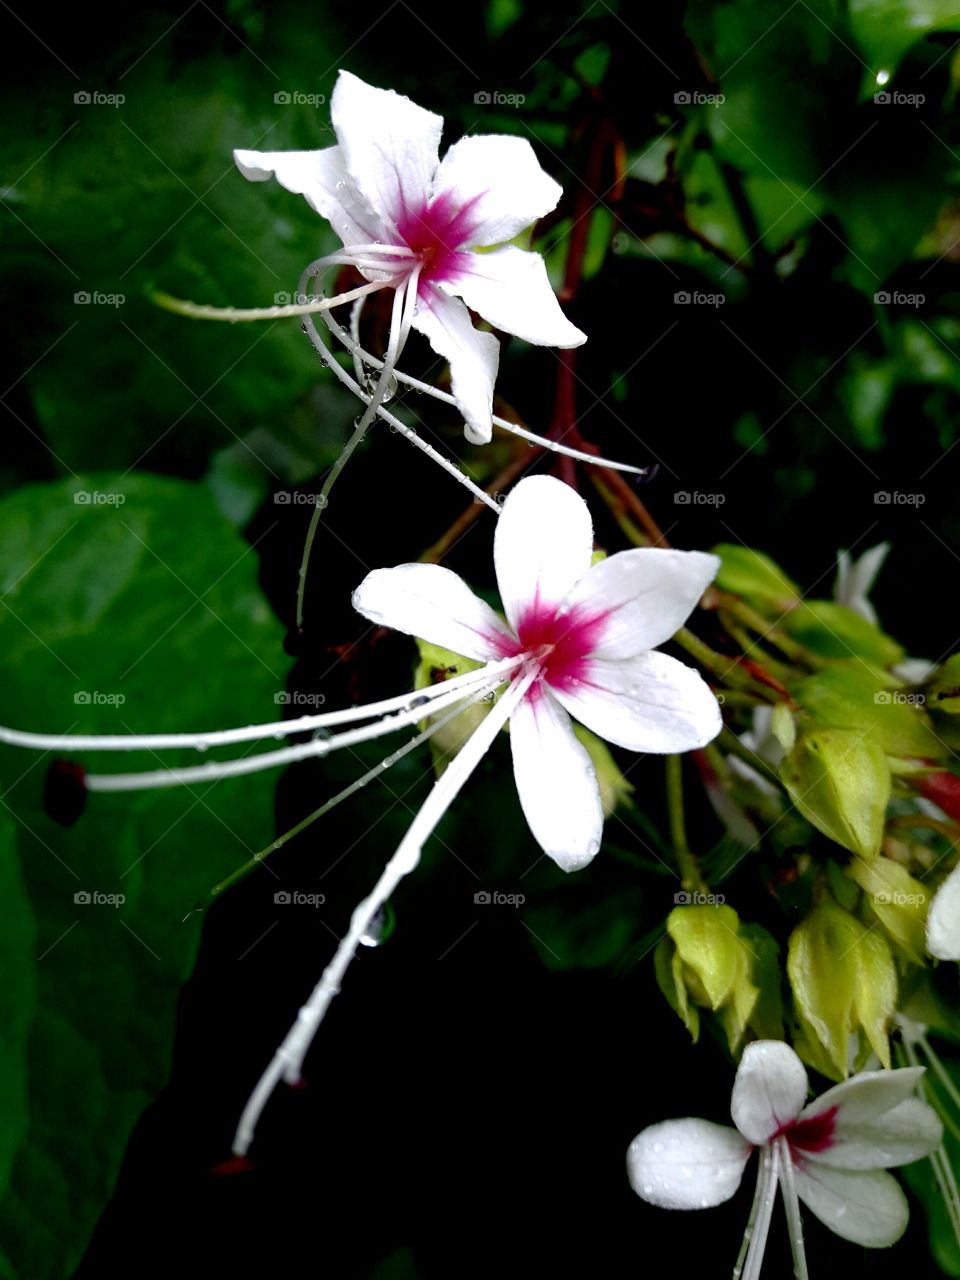 Flower, white and pink colour jungle flower with green leaf.